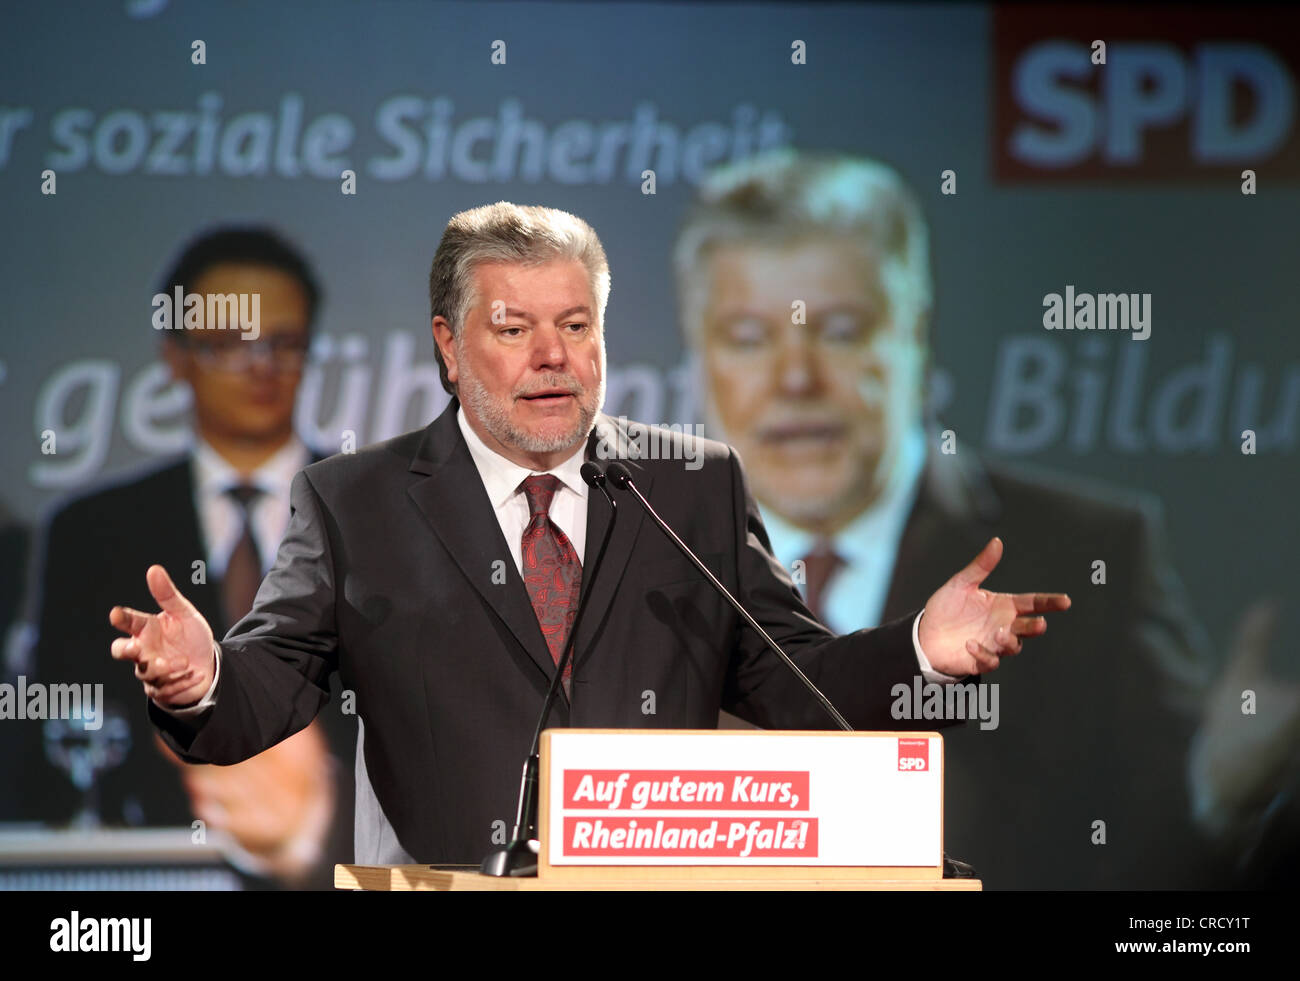 Kurt Beck, prime minister of Rhineland-Palatinate, SPD, social democratic party, speaking during an election campaign in Bendorf Stock Photo